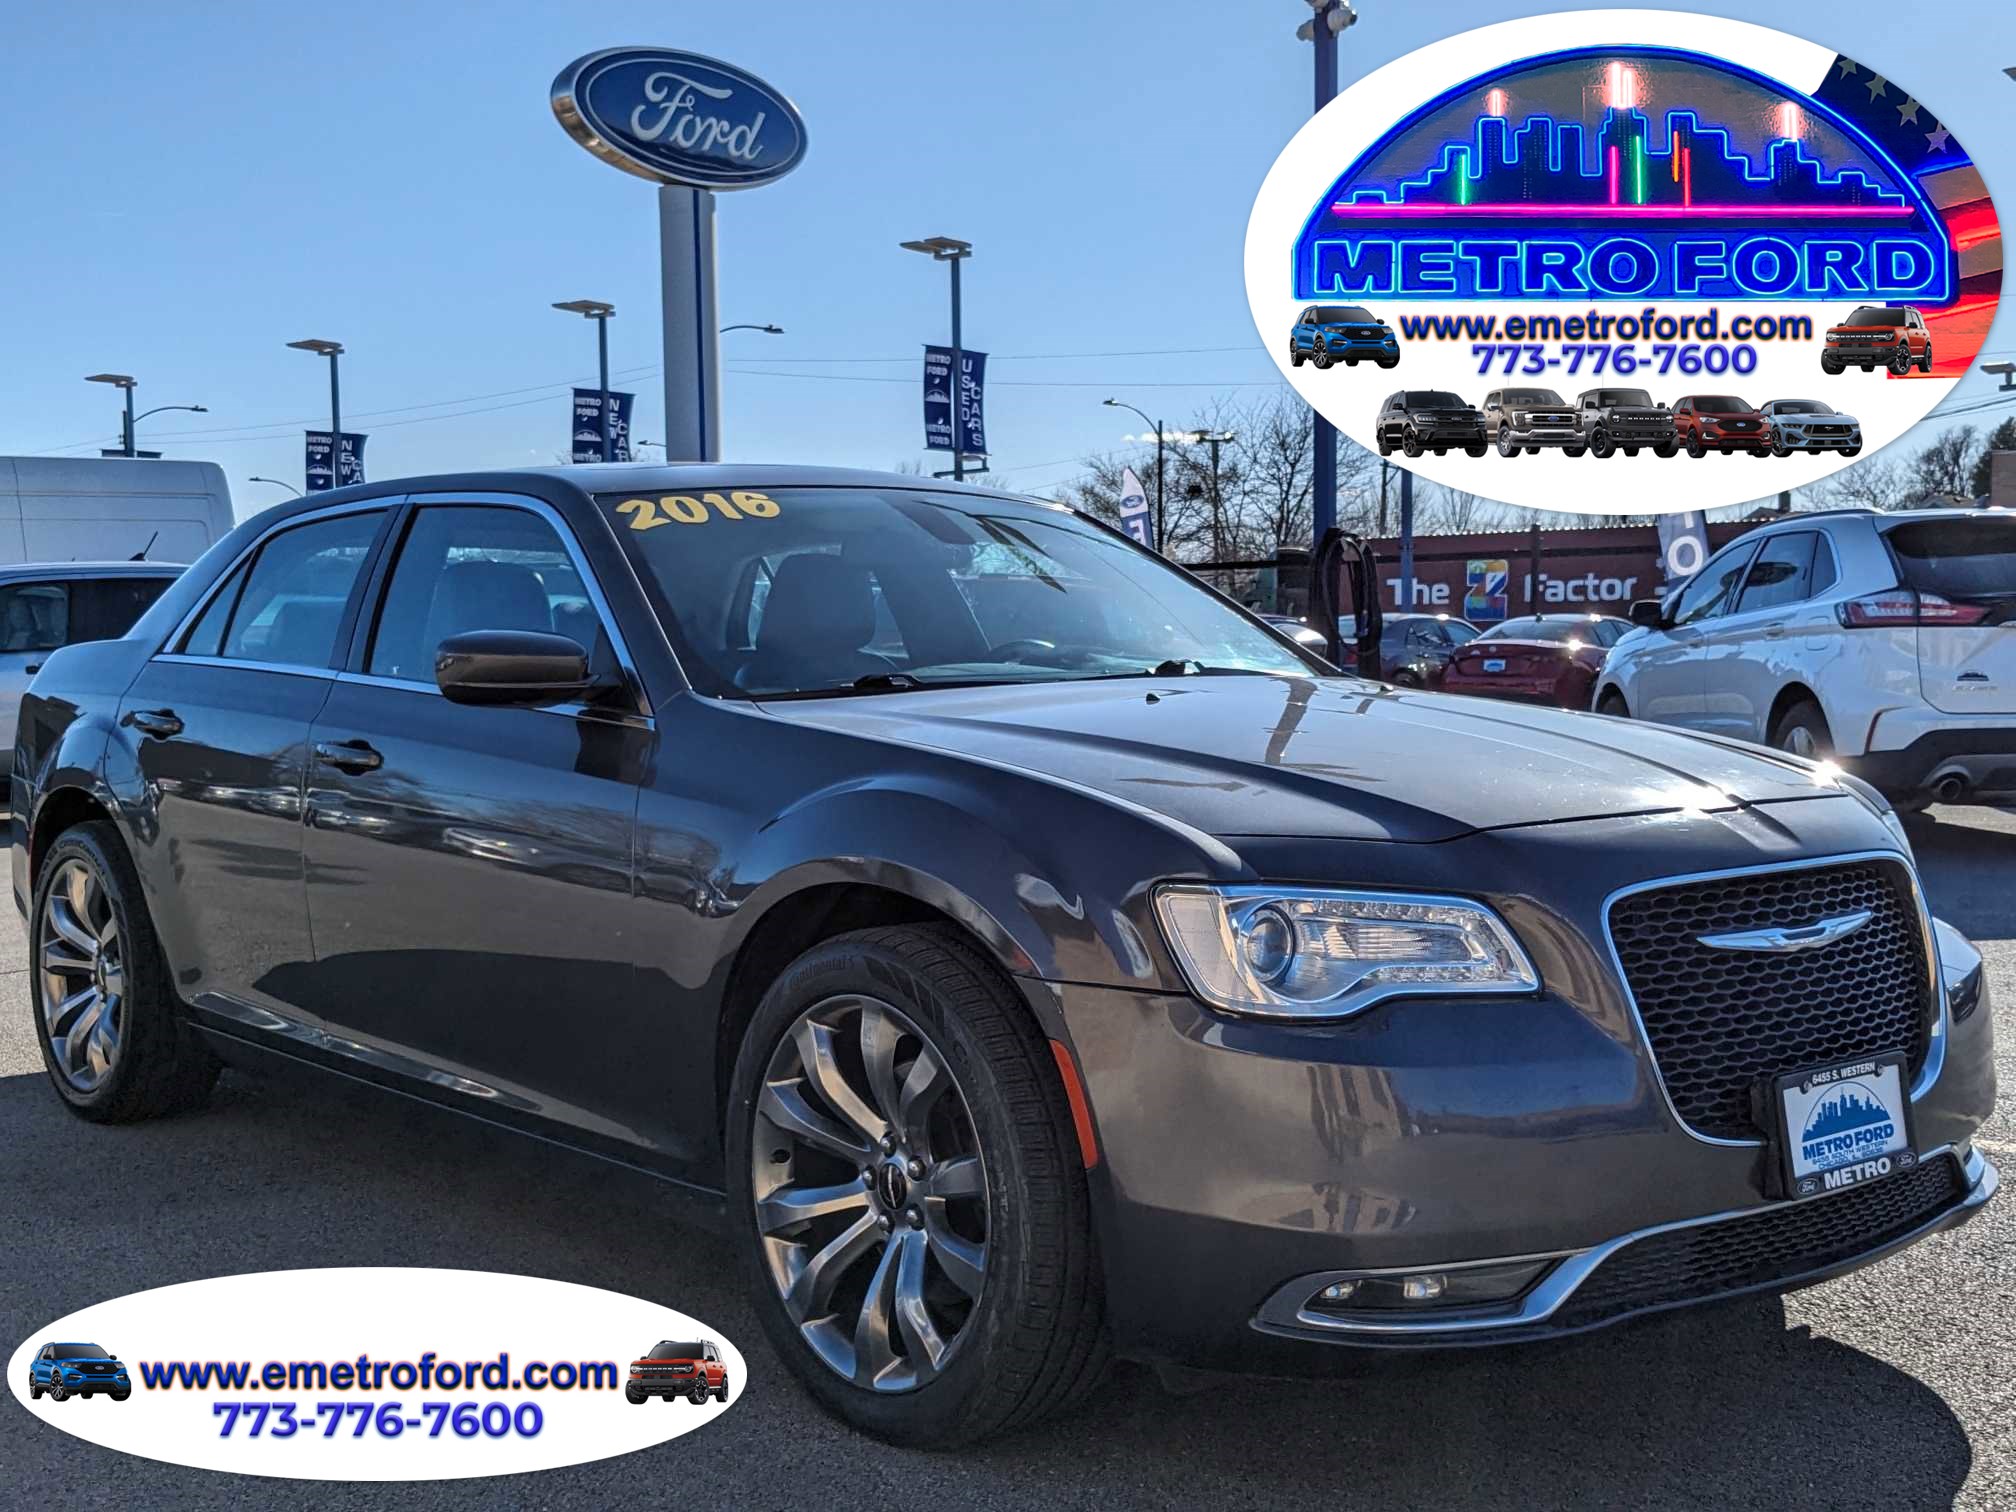 Used 2016 Chrysler 300 Anniversary Edition For Sale Chicago